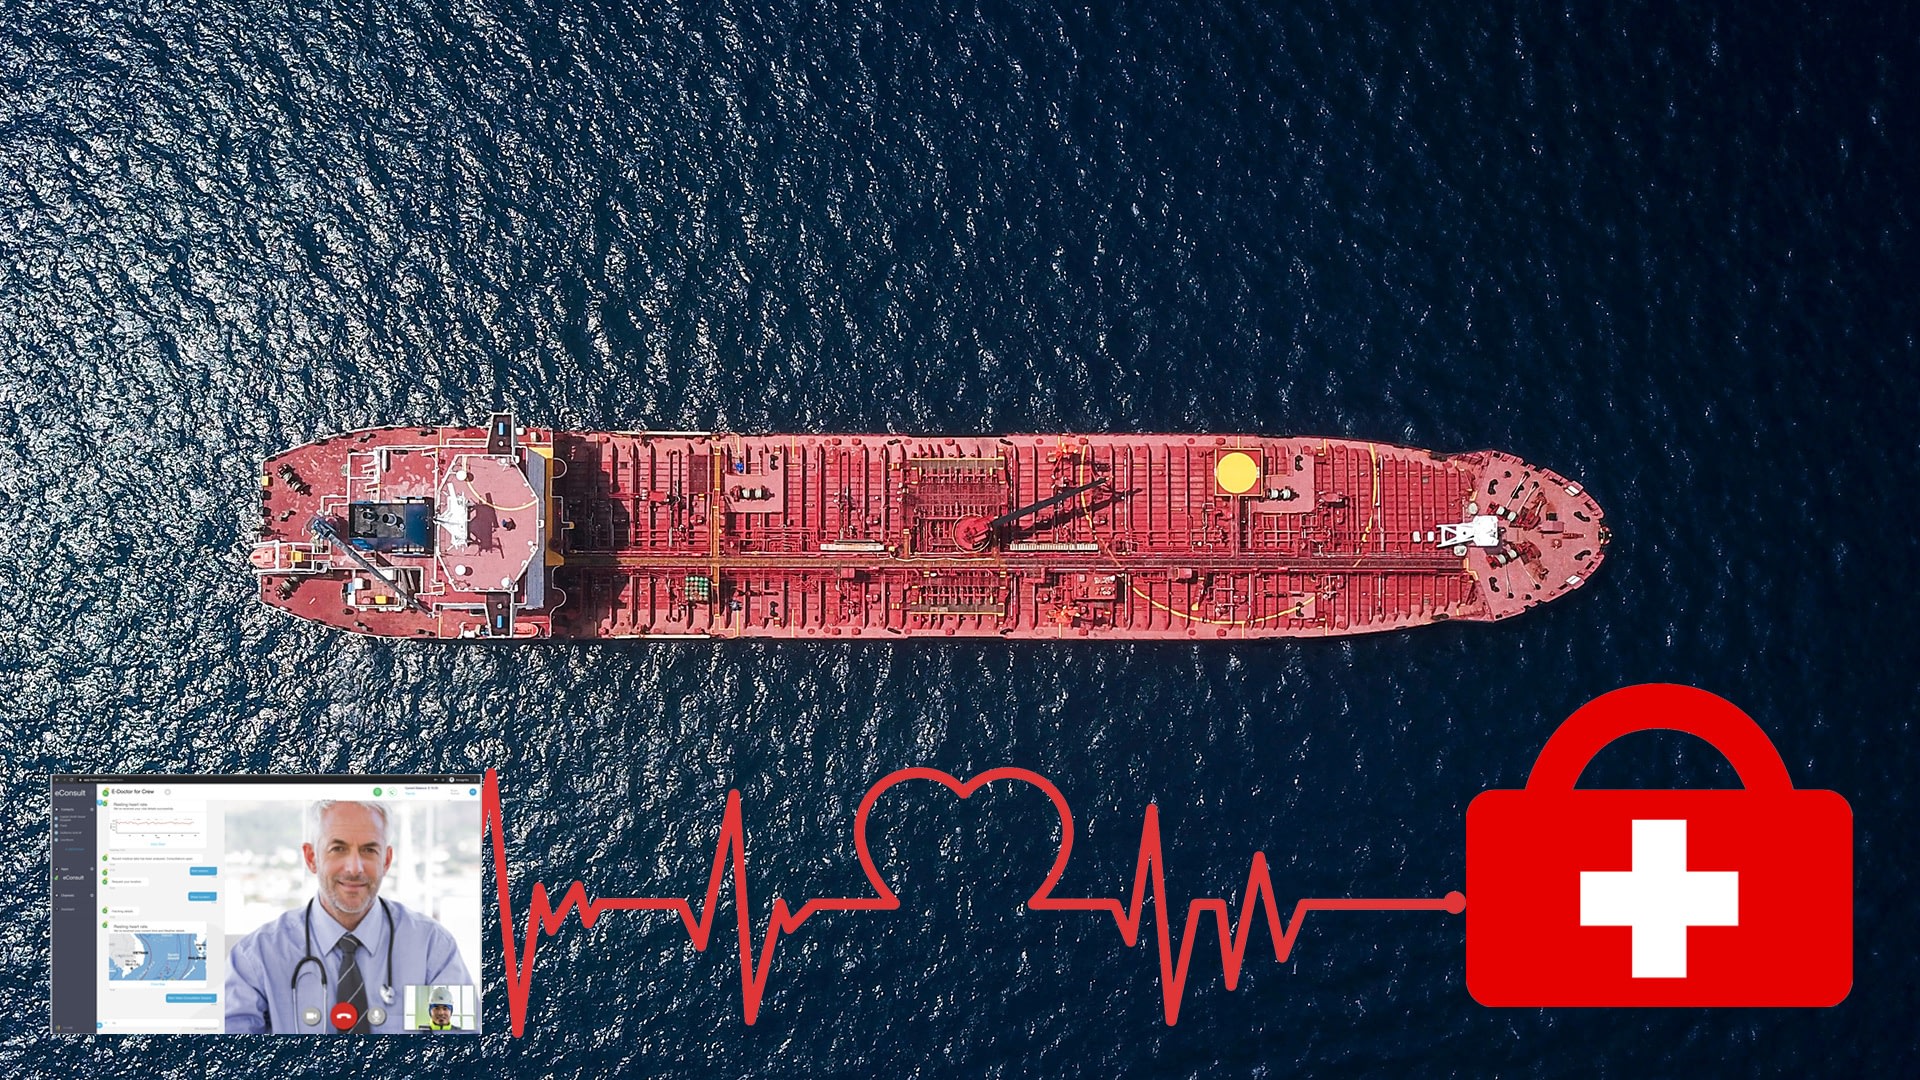 FrontM partners with Inmarsat and VIKAND to develop COVID-19 healthcare information hotline for maritime workforce